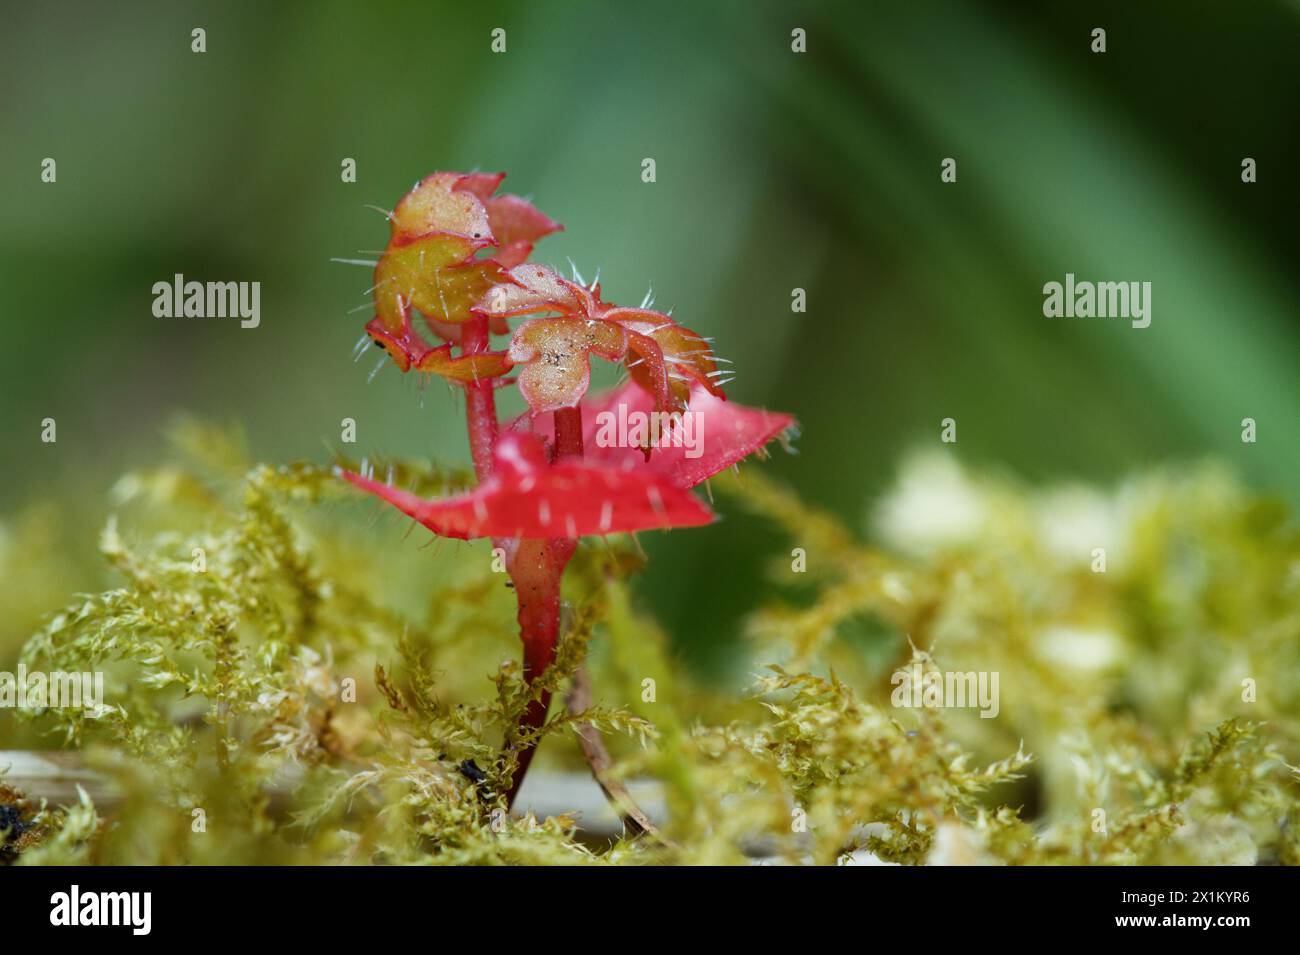 Macro, Close Up Of A Red Plant With Spines On Its Leaves Growing On Moss, New Forest UK Stock Photo